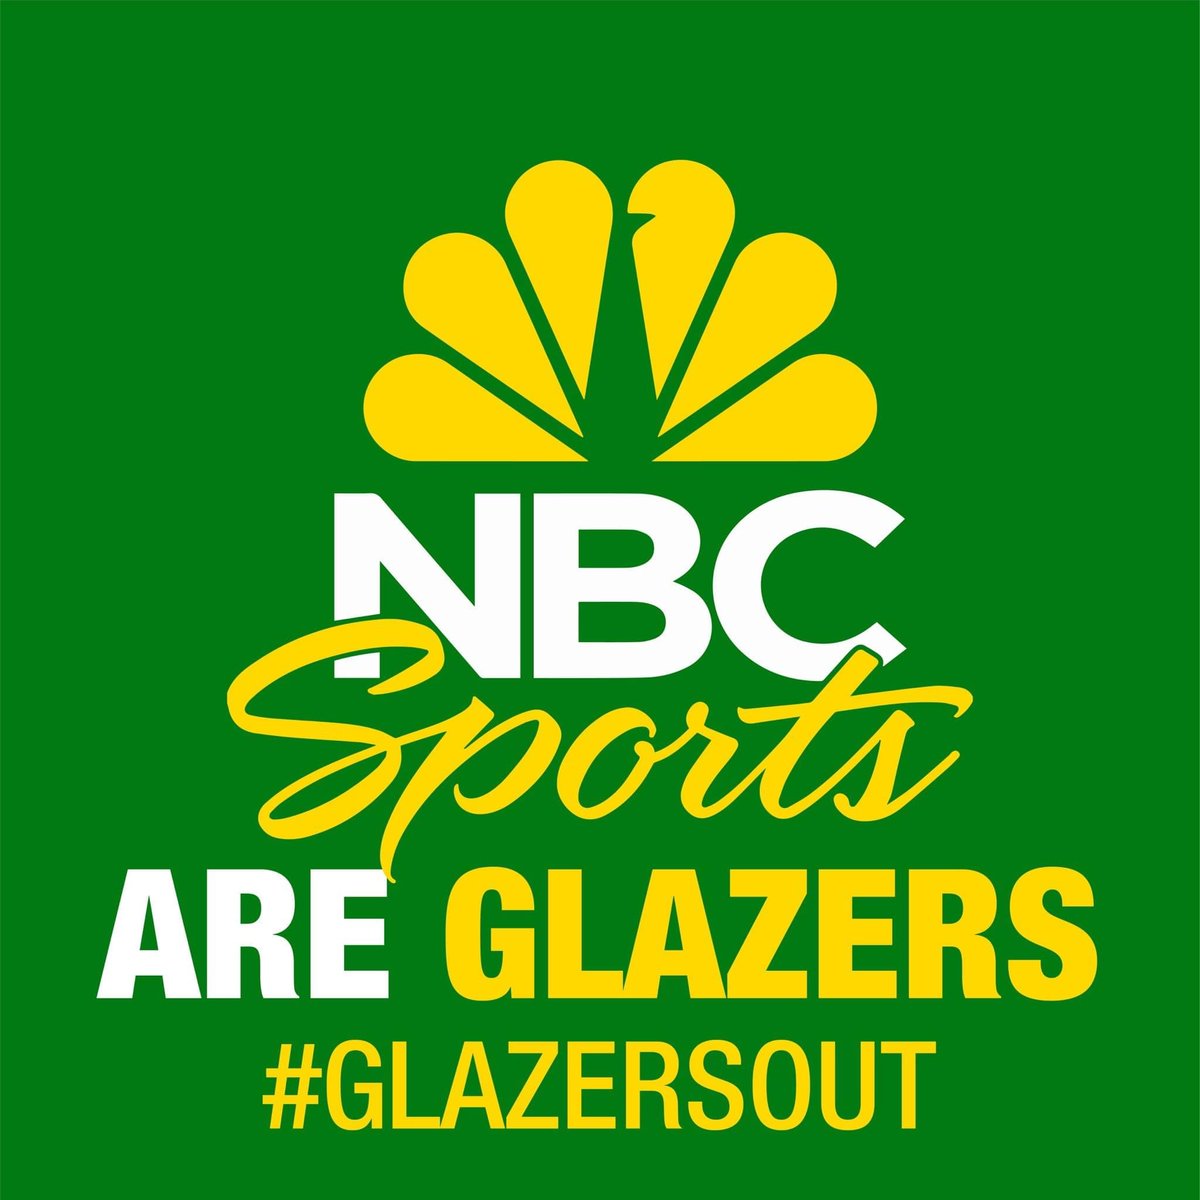 Manchester United fans rewatch NBC as the players walk off the pitch at full time. NBC Sports goes from a slow pan of the players and crowd to an abrupt move as soon as #GlazersOut flags are seen. NBC Sports are Glazers puppets. #GlazersOut #LoveUnitedHateGlazers